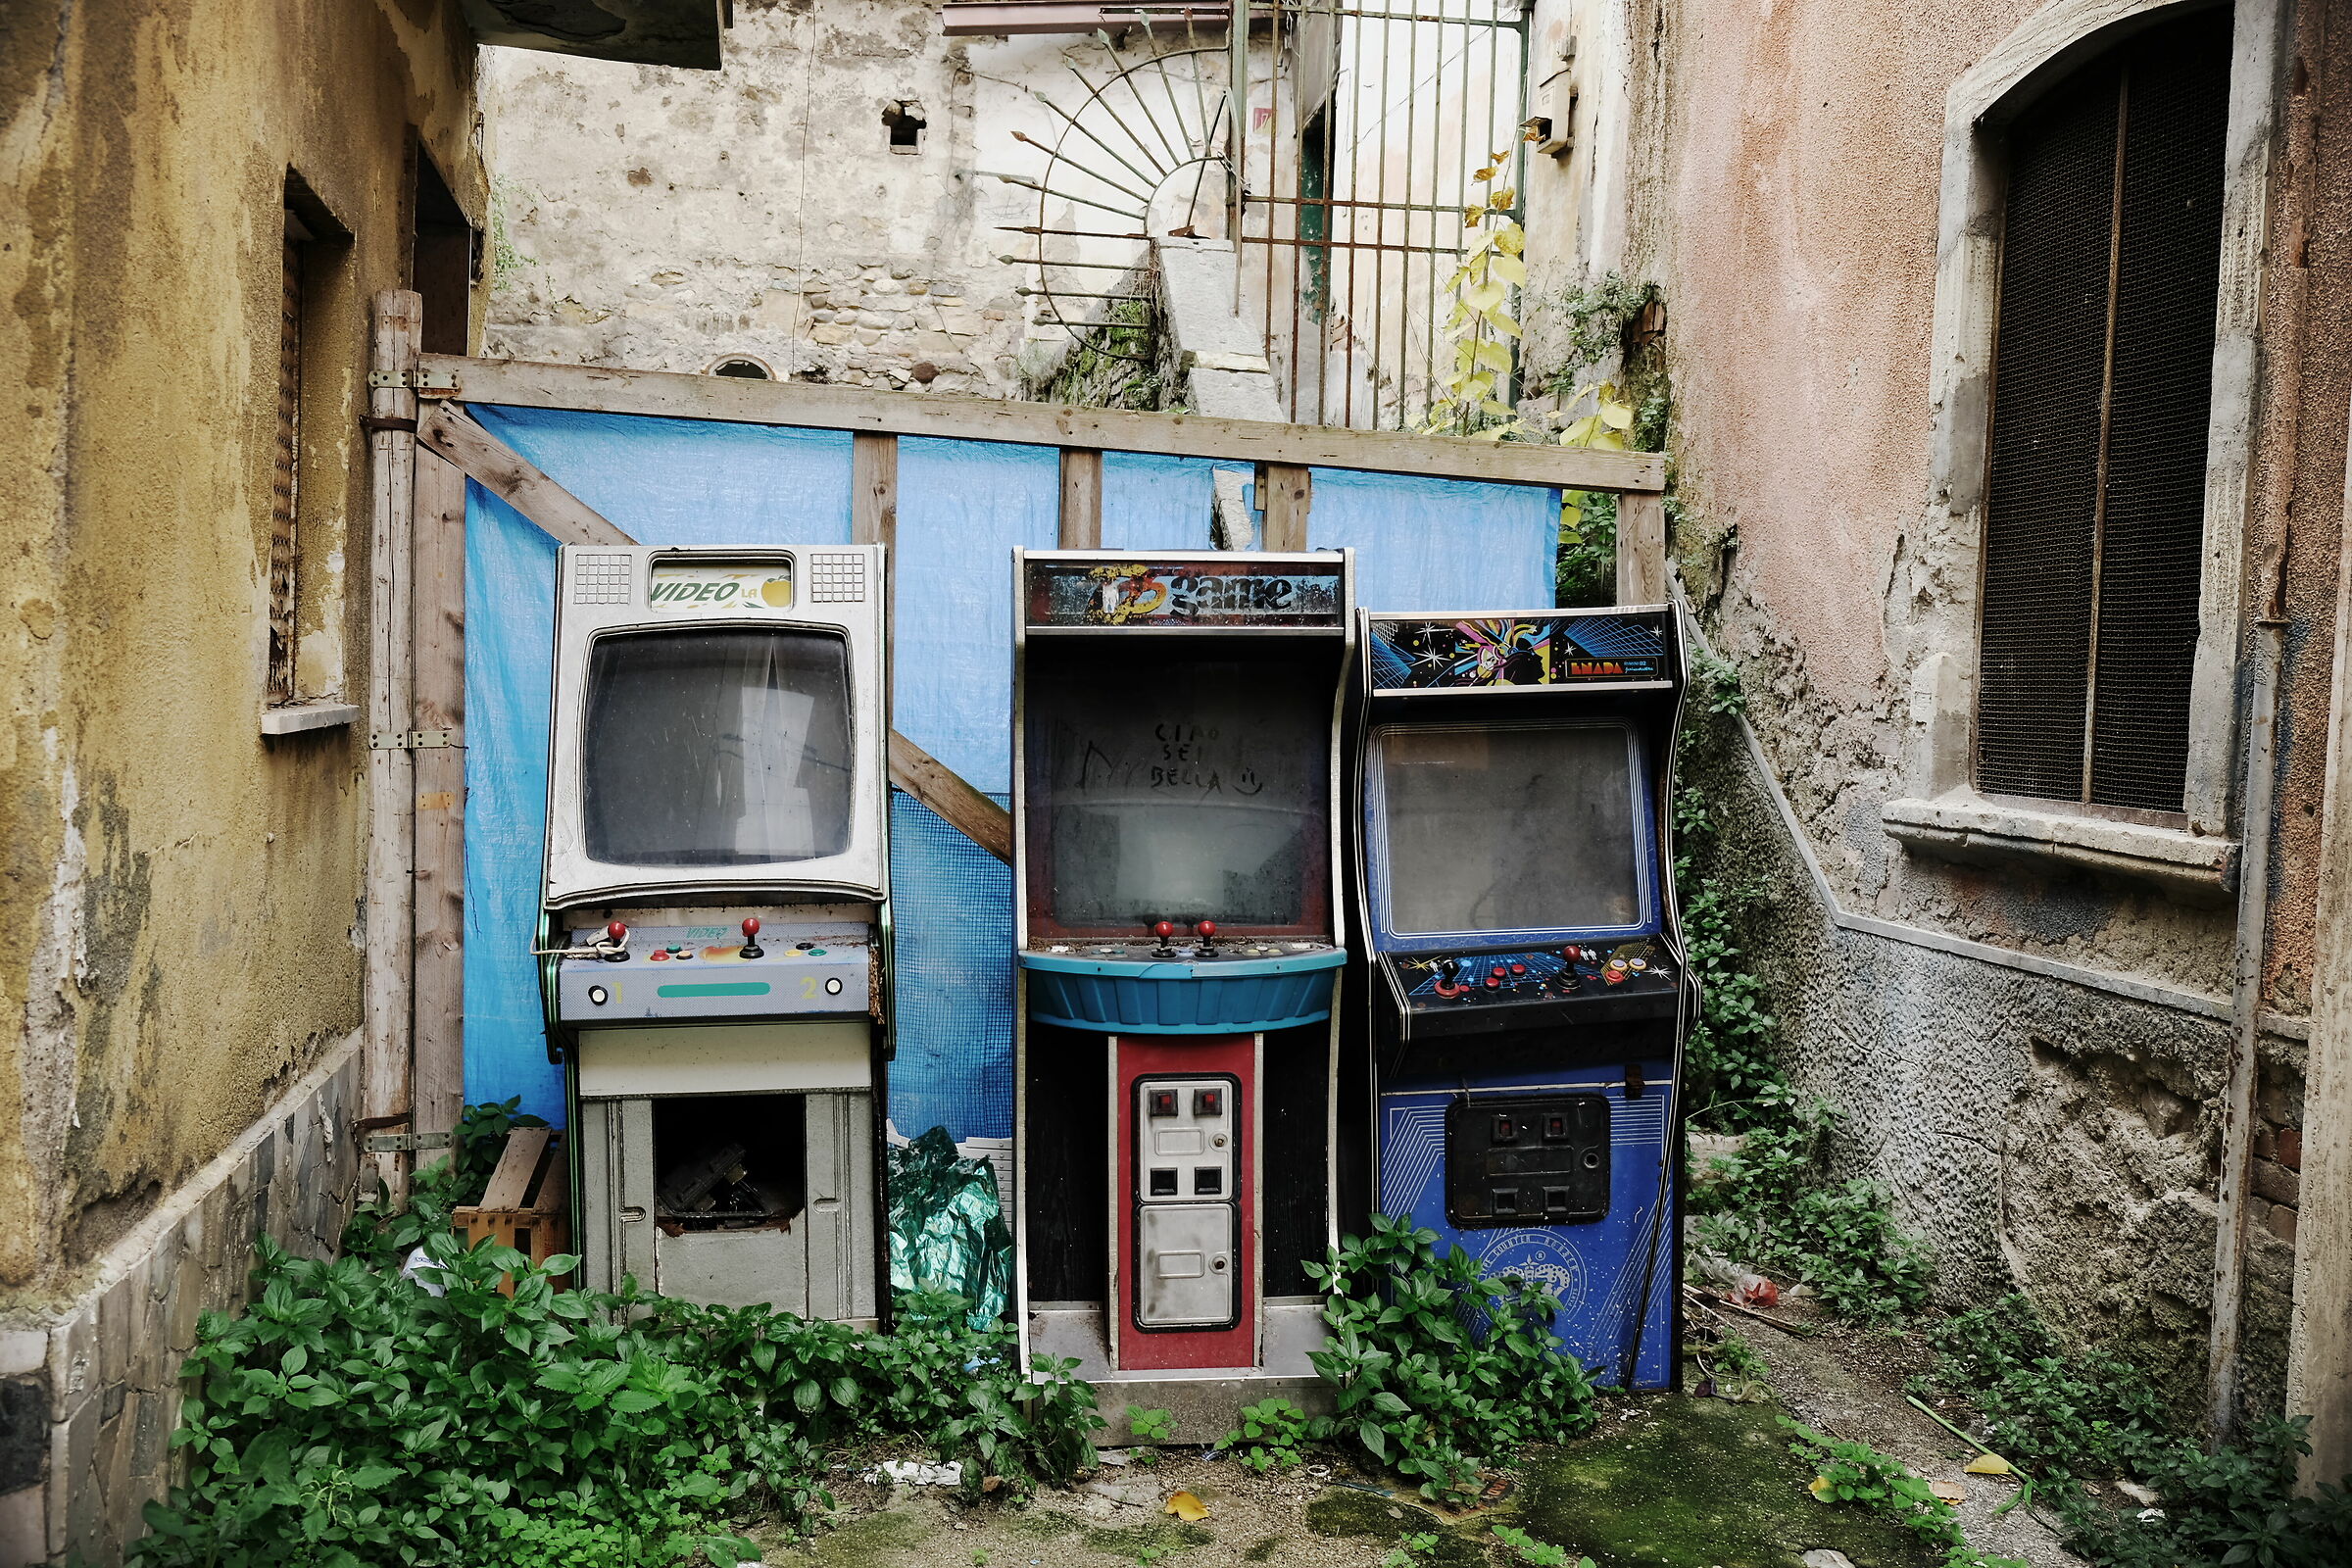 Old video games rest in the city...